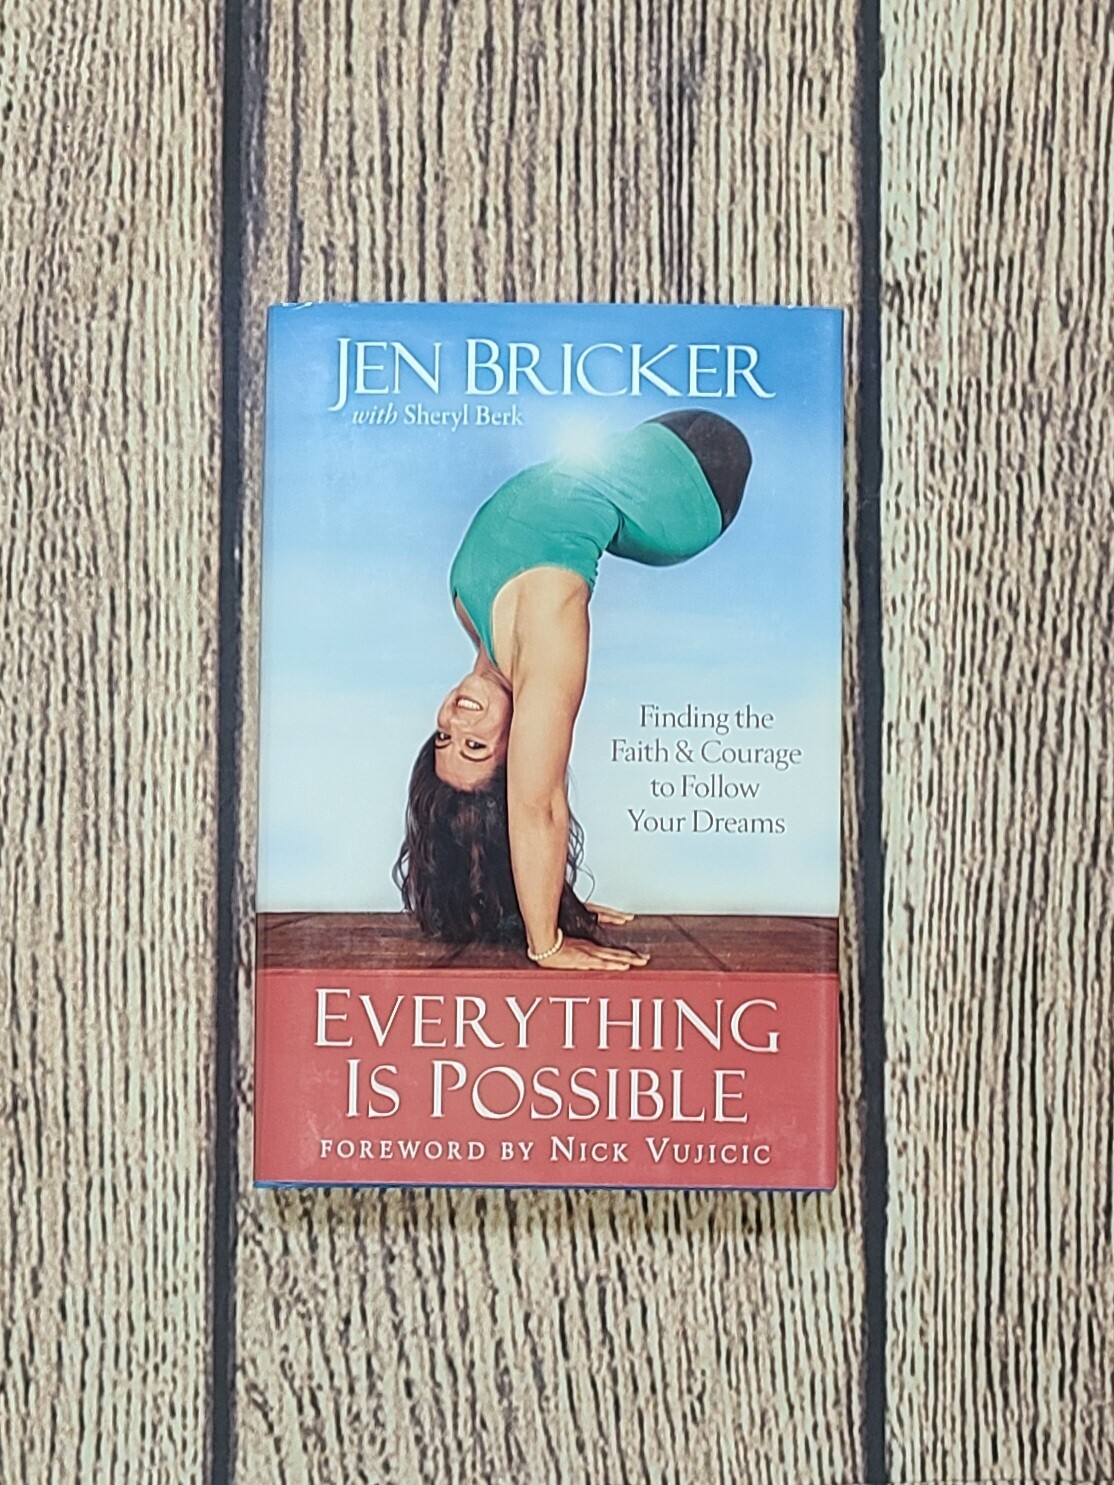 Everything is Possible by Jen Bricker with Sheryl Berk